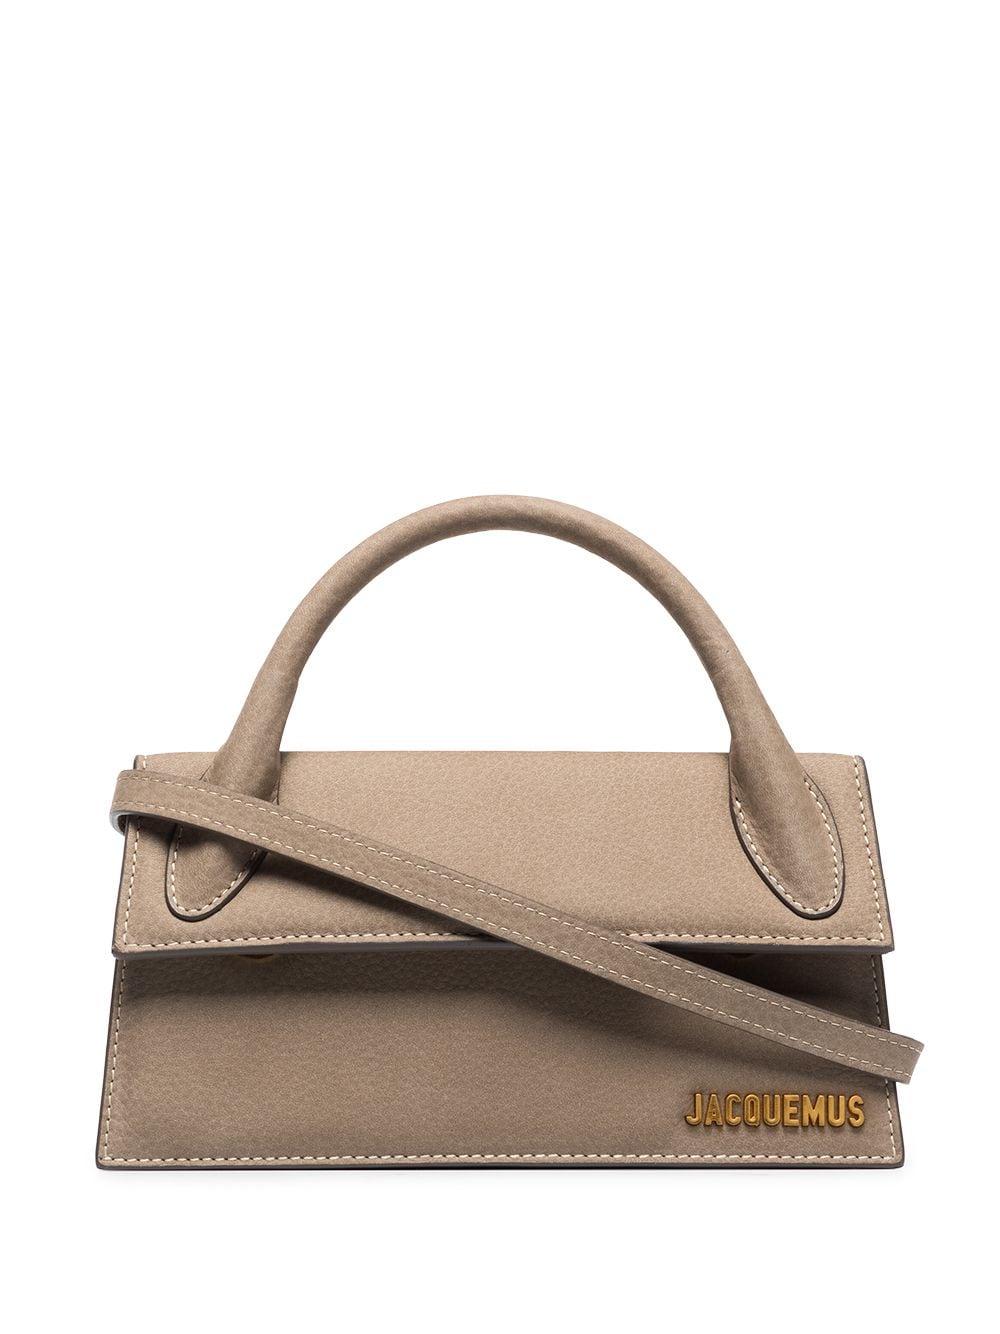 Jacquemus Le Chiquito Long Suede Top Handle Bag in Gray